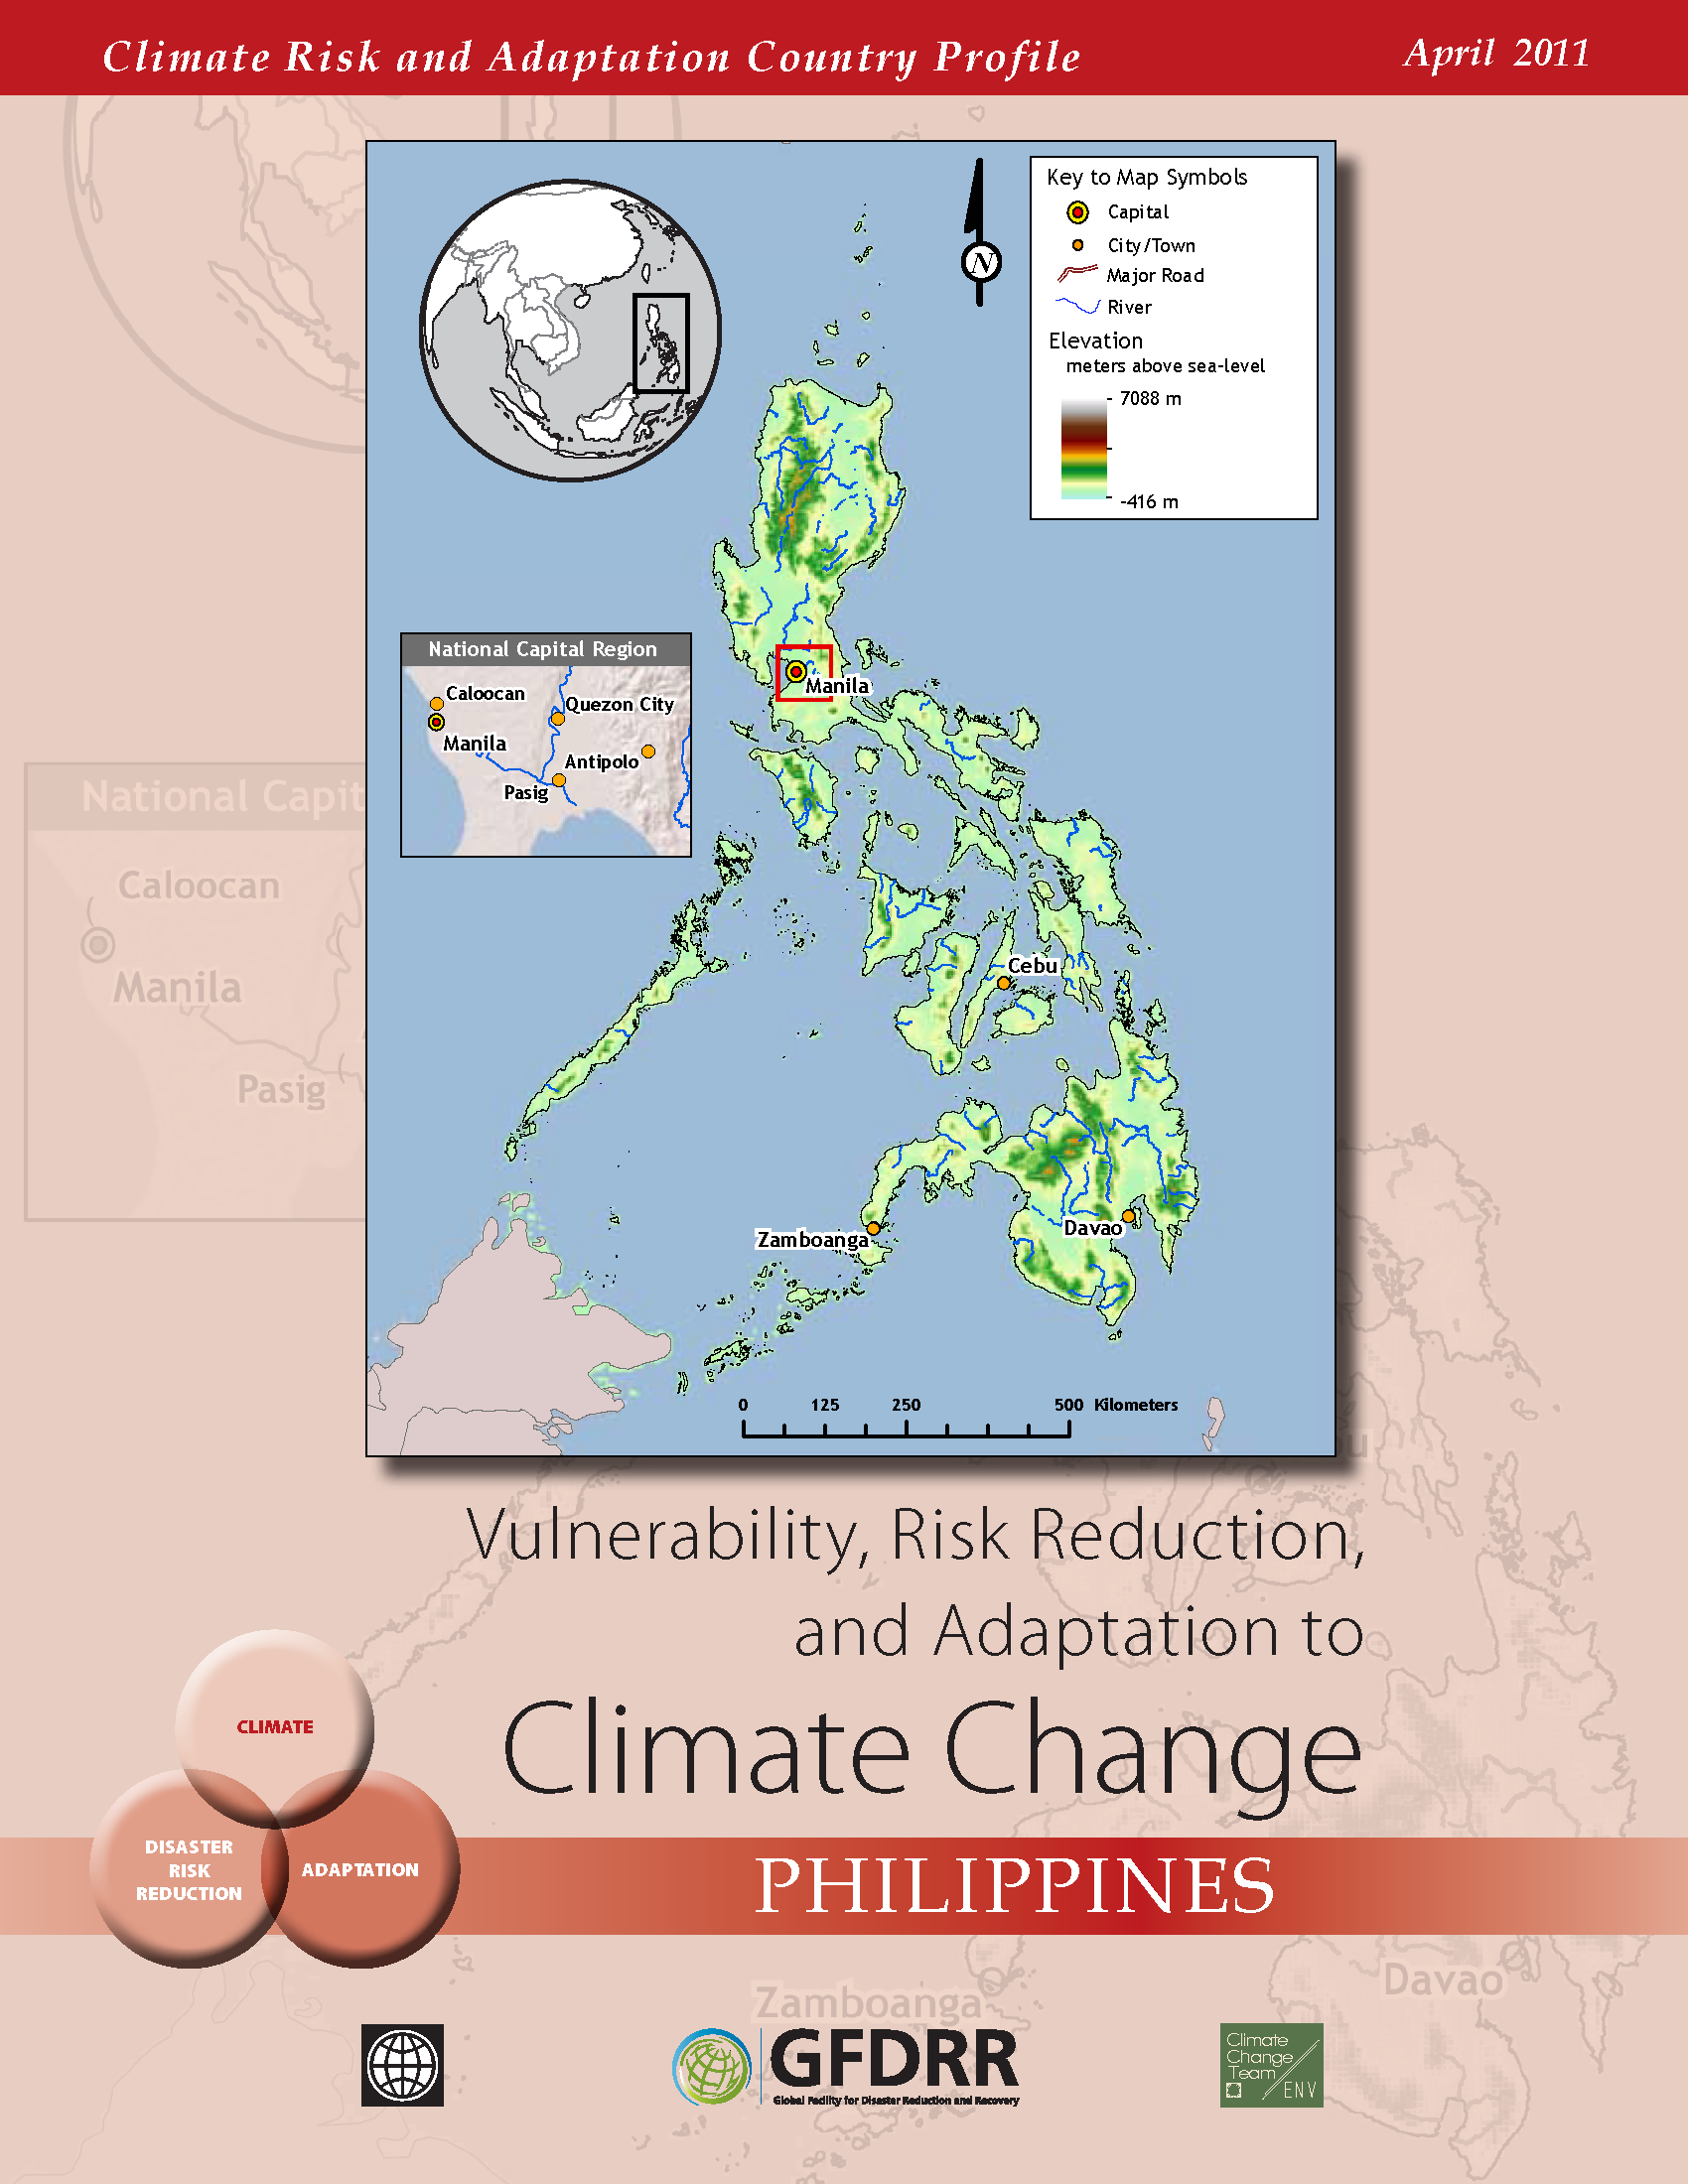 Climate Risk and Adaptation Country Profile Philippines GFDRR